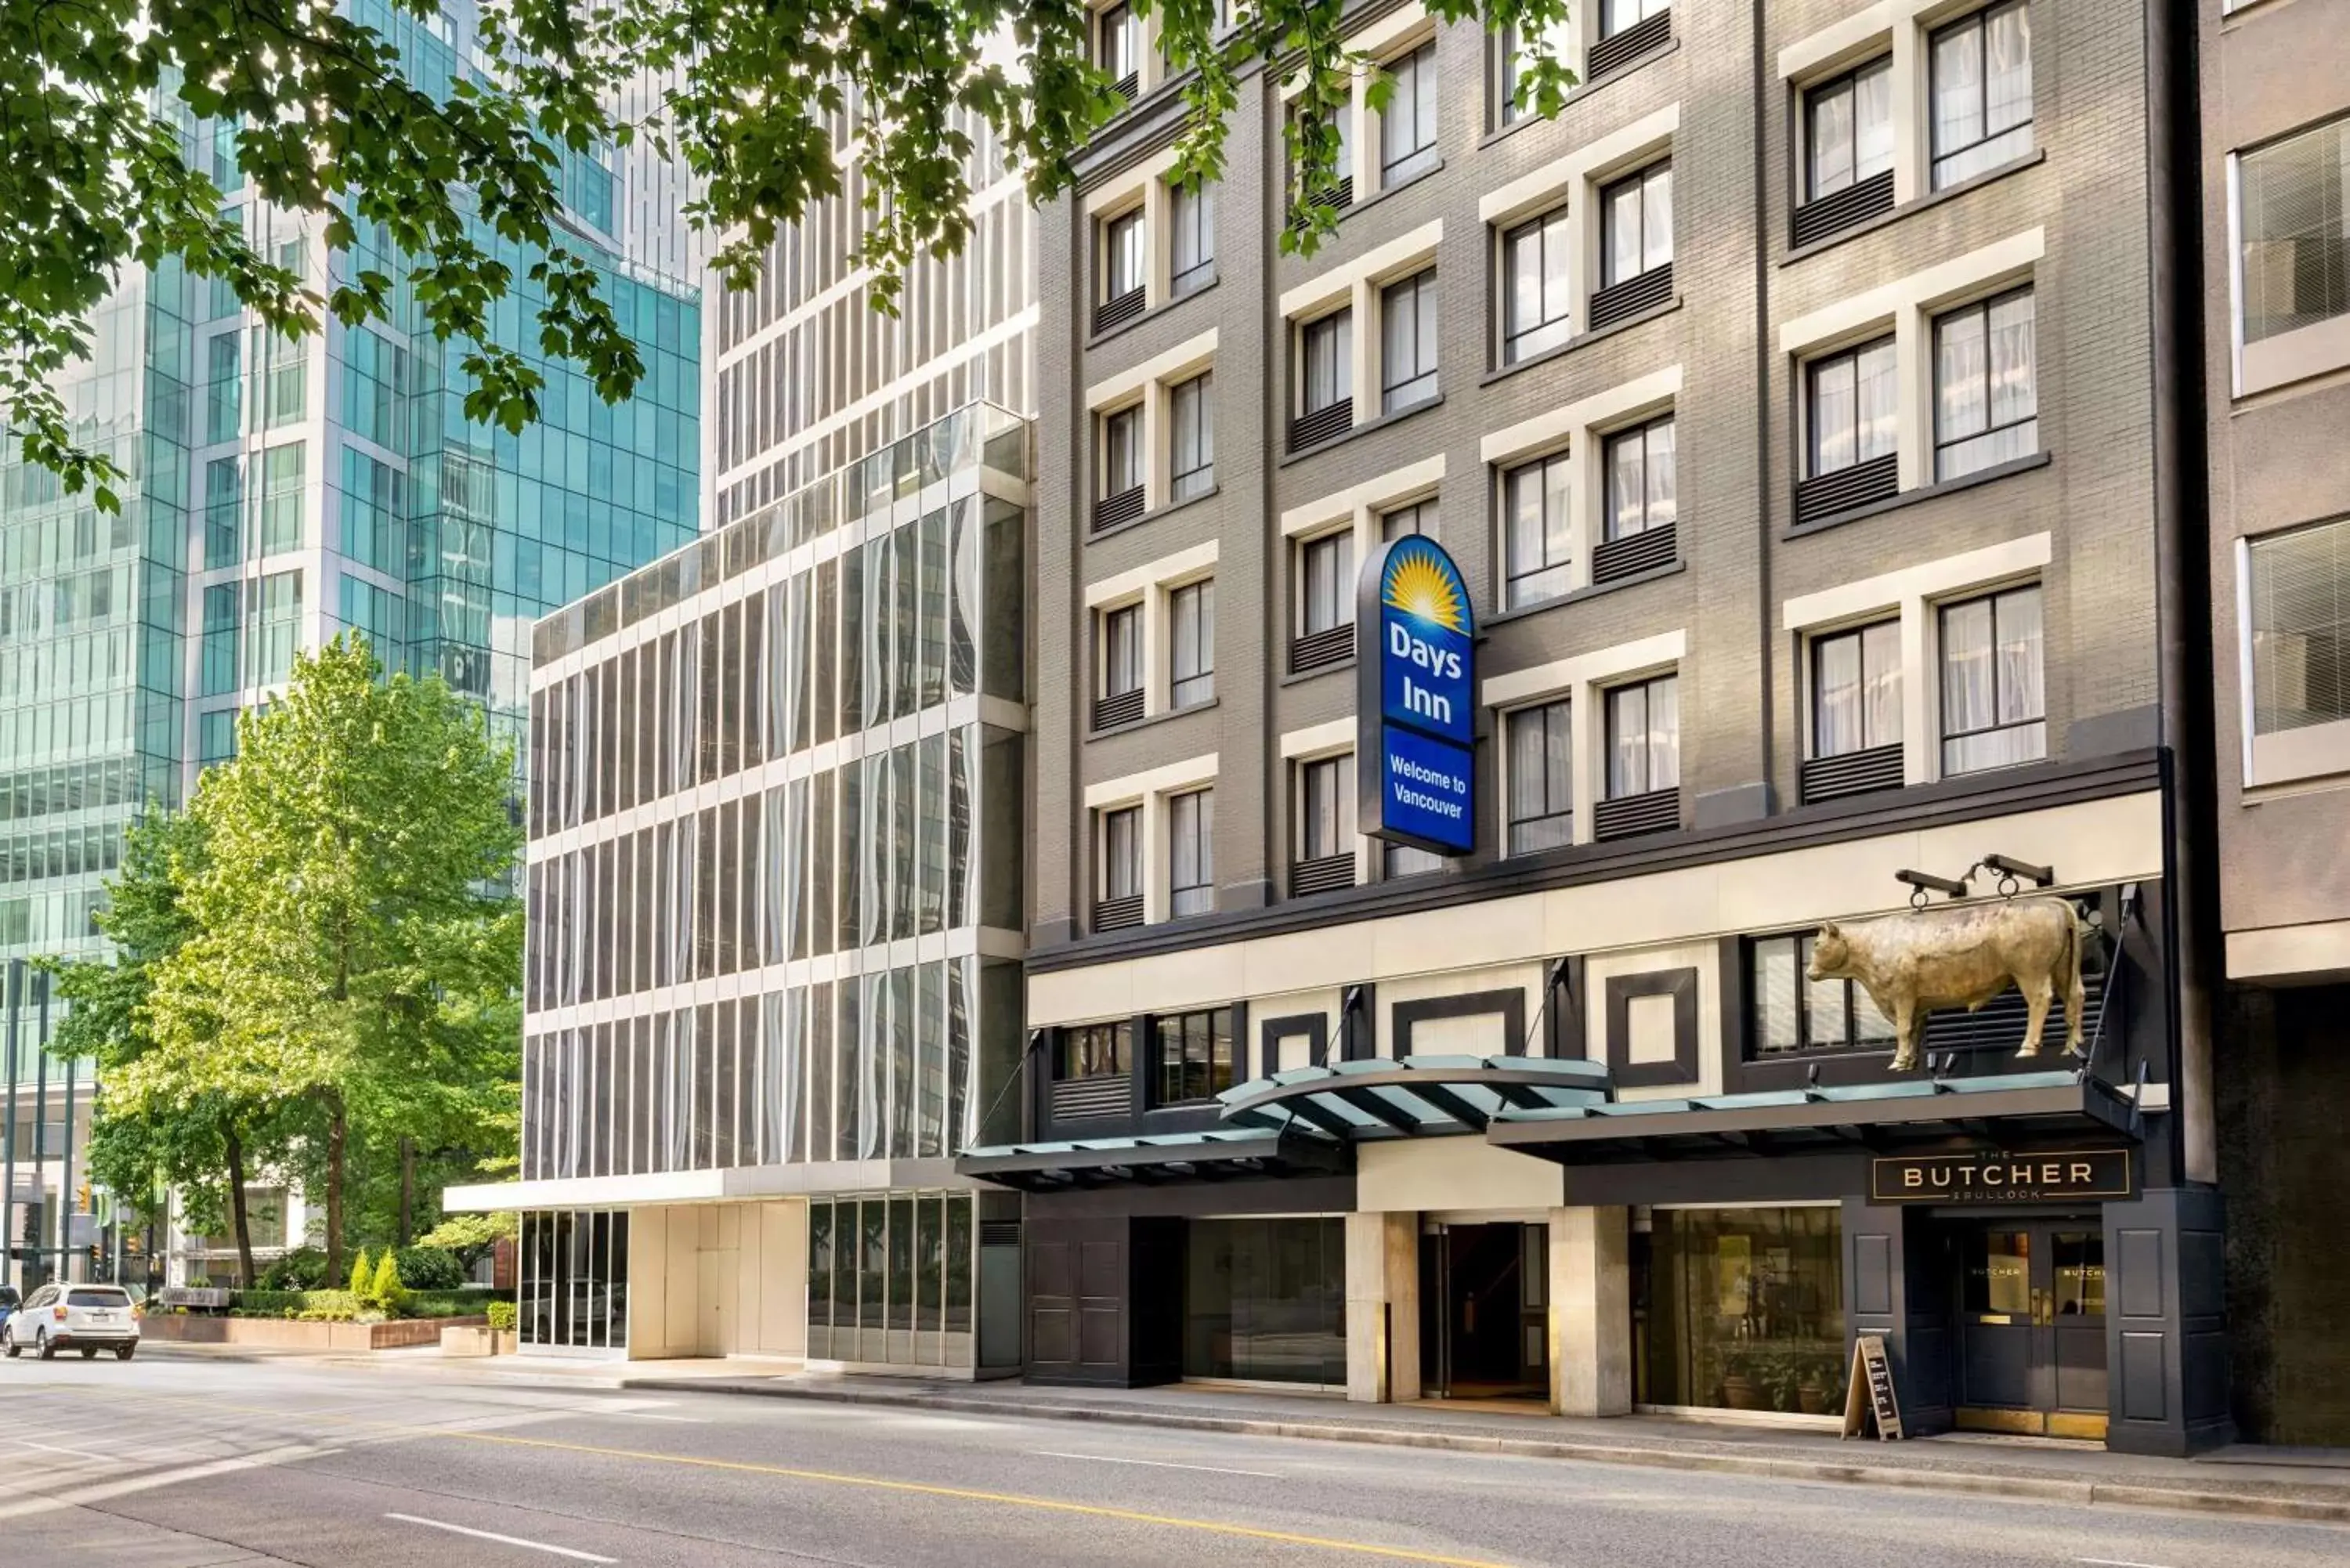 Property Building in Days Inn by Wyndham Vancouver Downtown